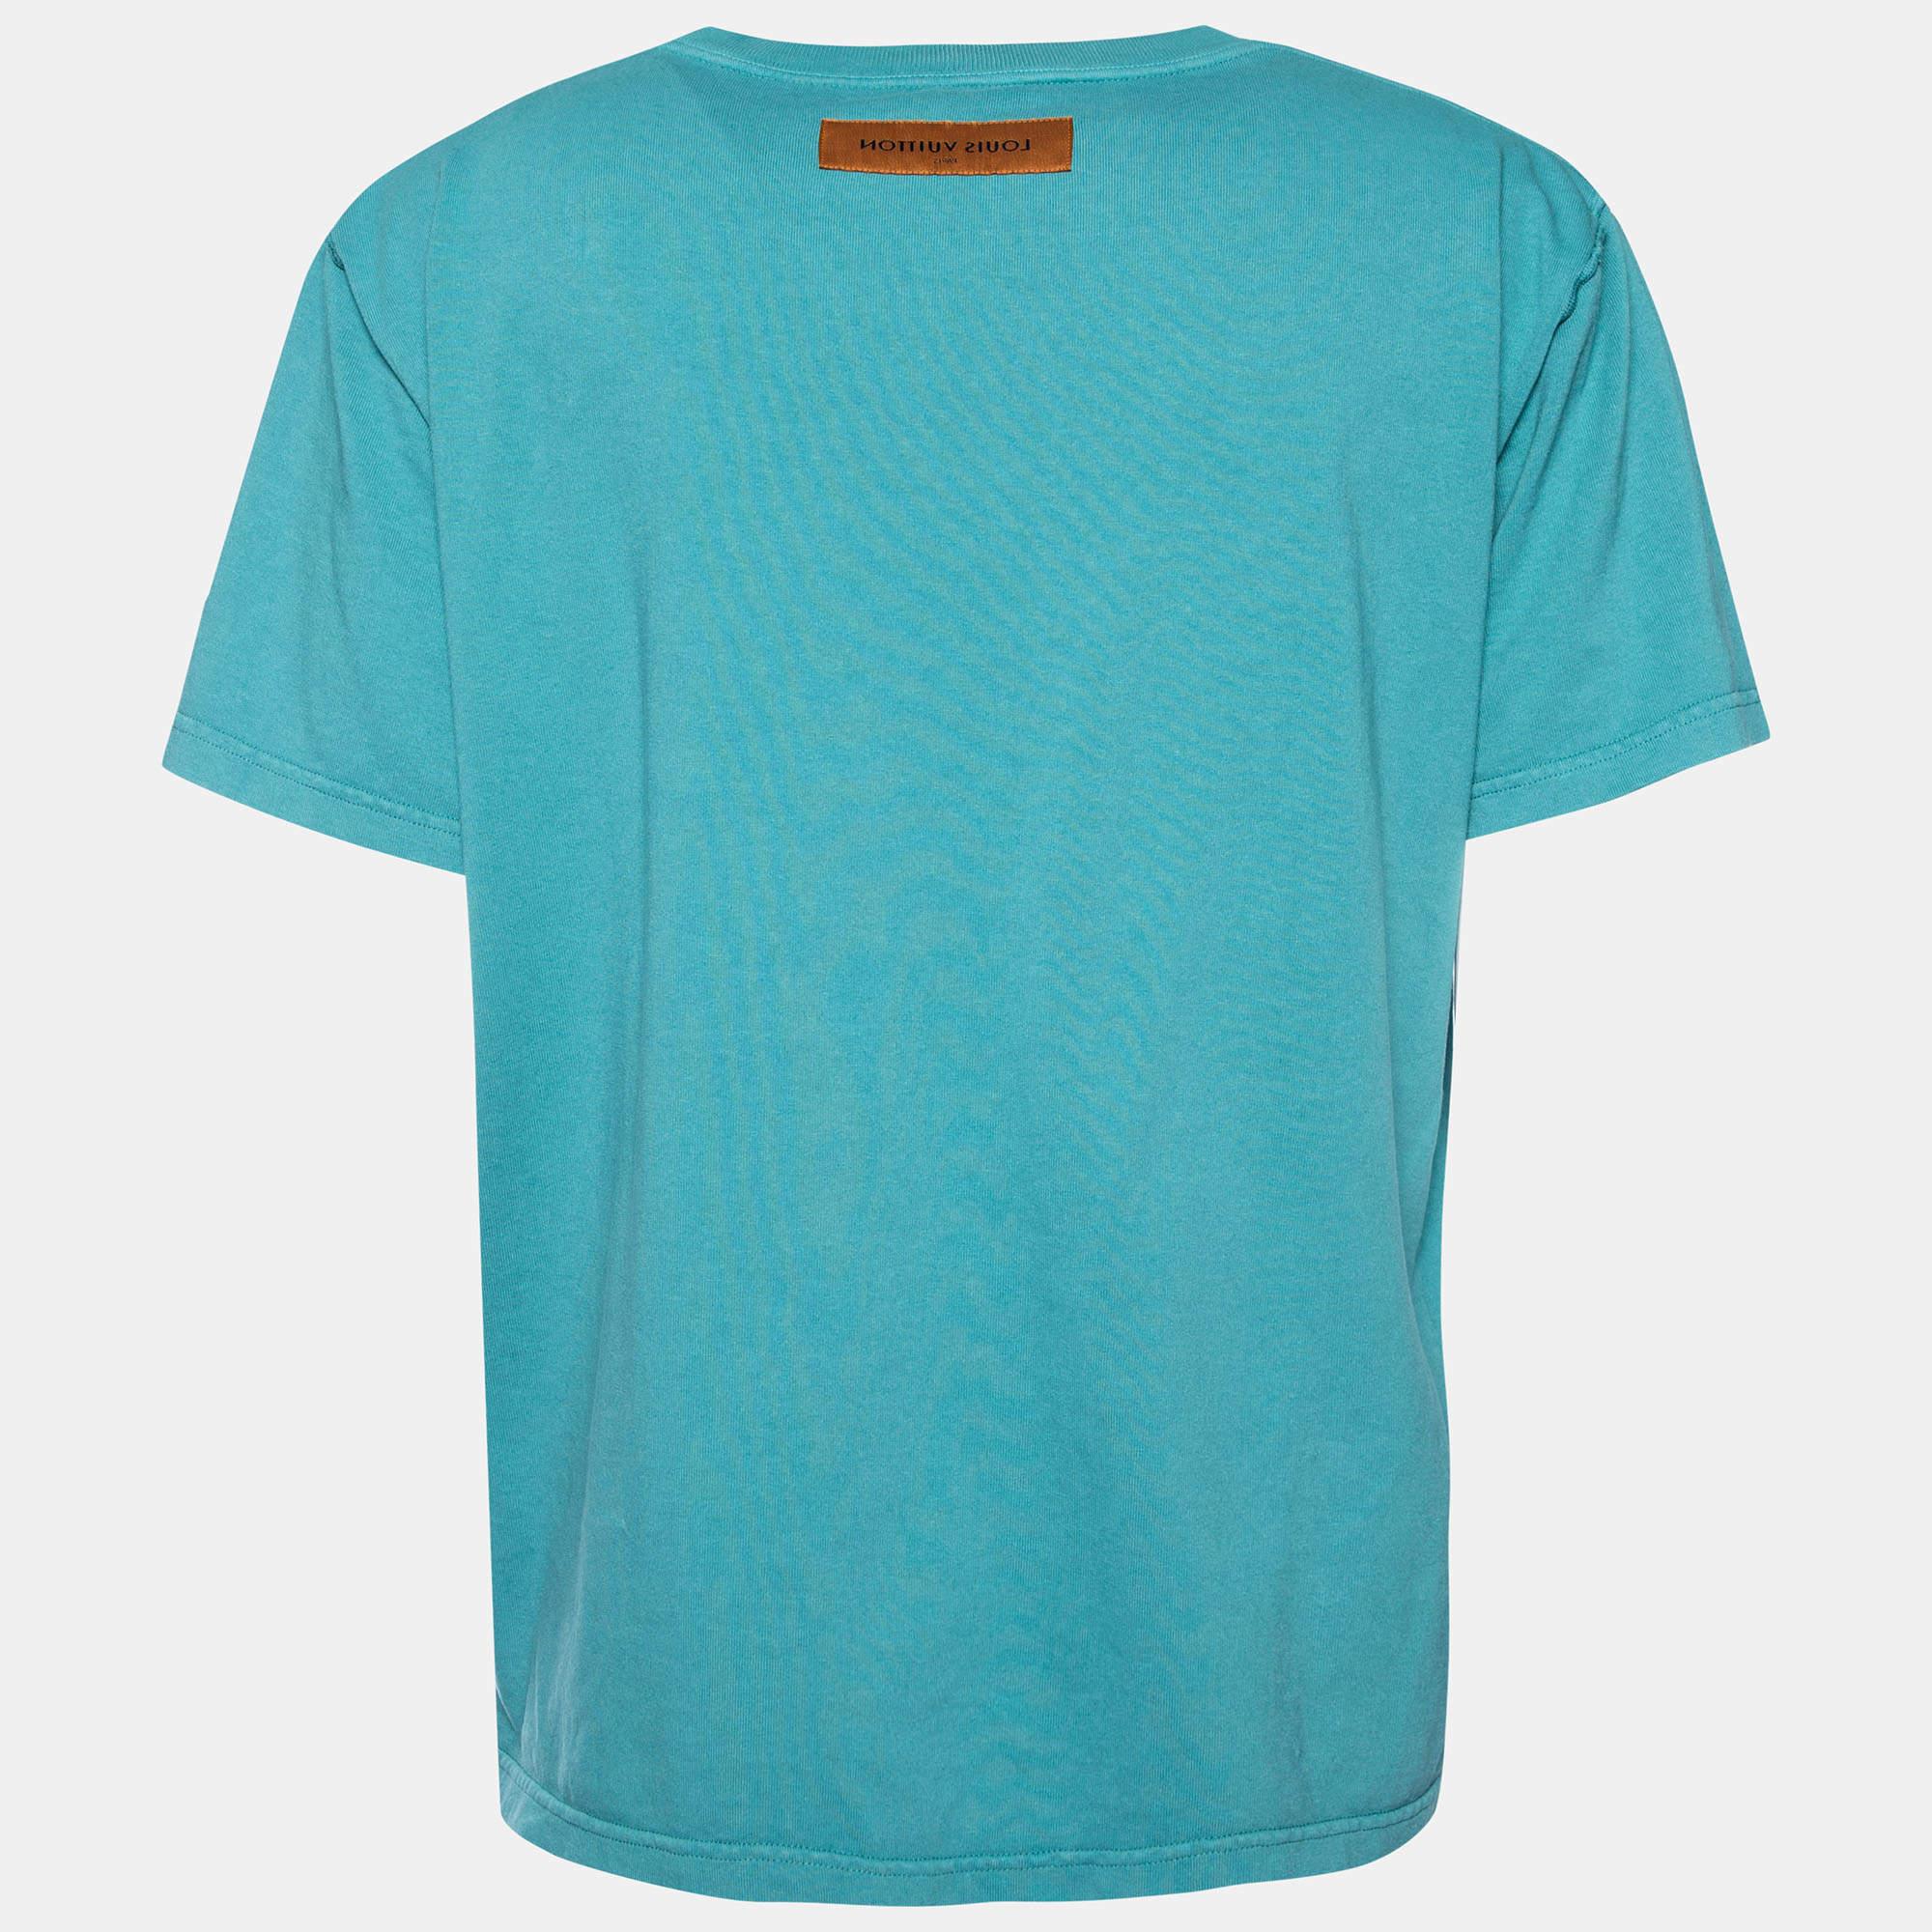 Revamp your casual outfit with this T-shirt from the House of Louis Vuitton. It is tailored using green terry knit fabric into an oversized silhouette. It has short sleeves. This LV T-shirt can be paired with jeans for a trendy style.

